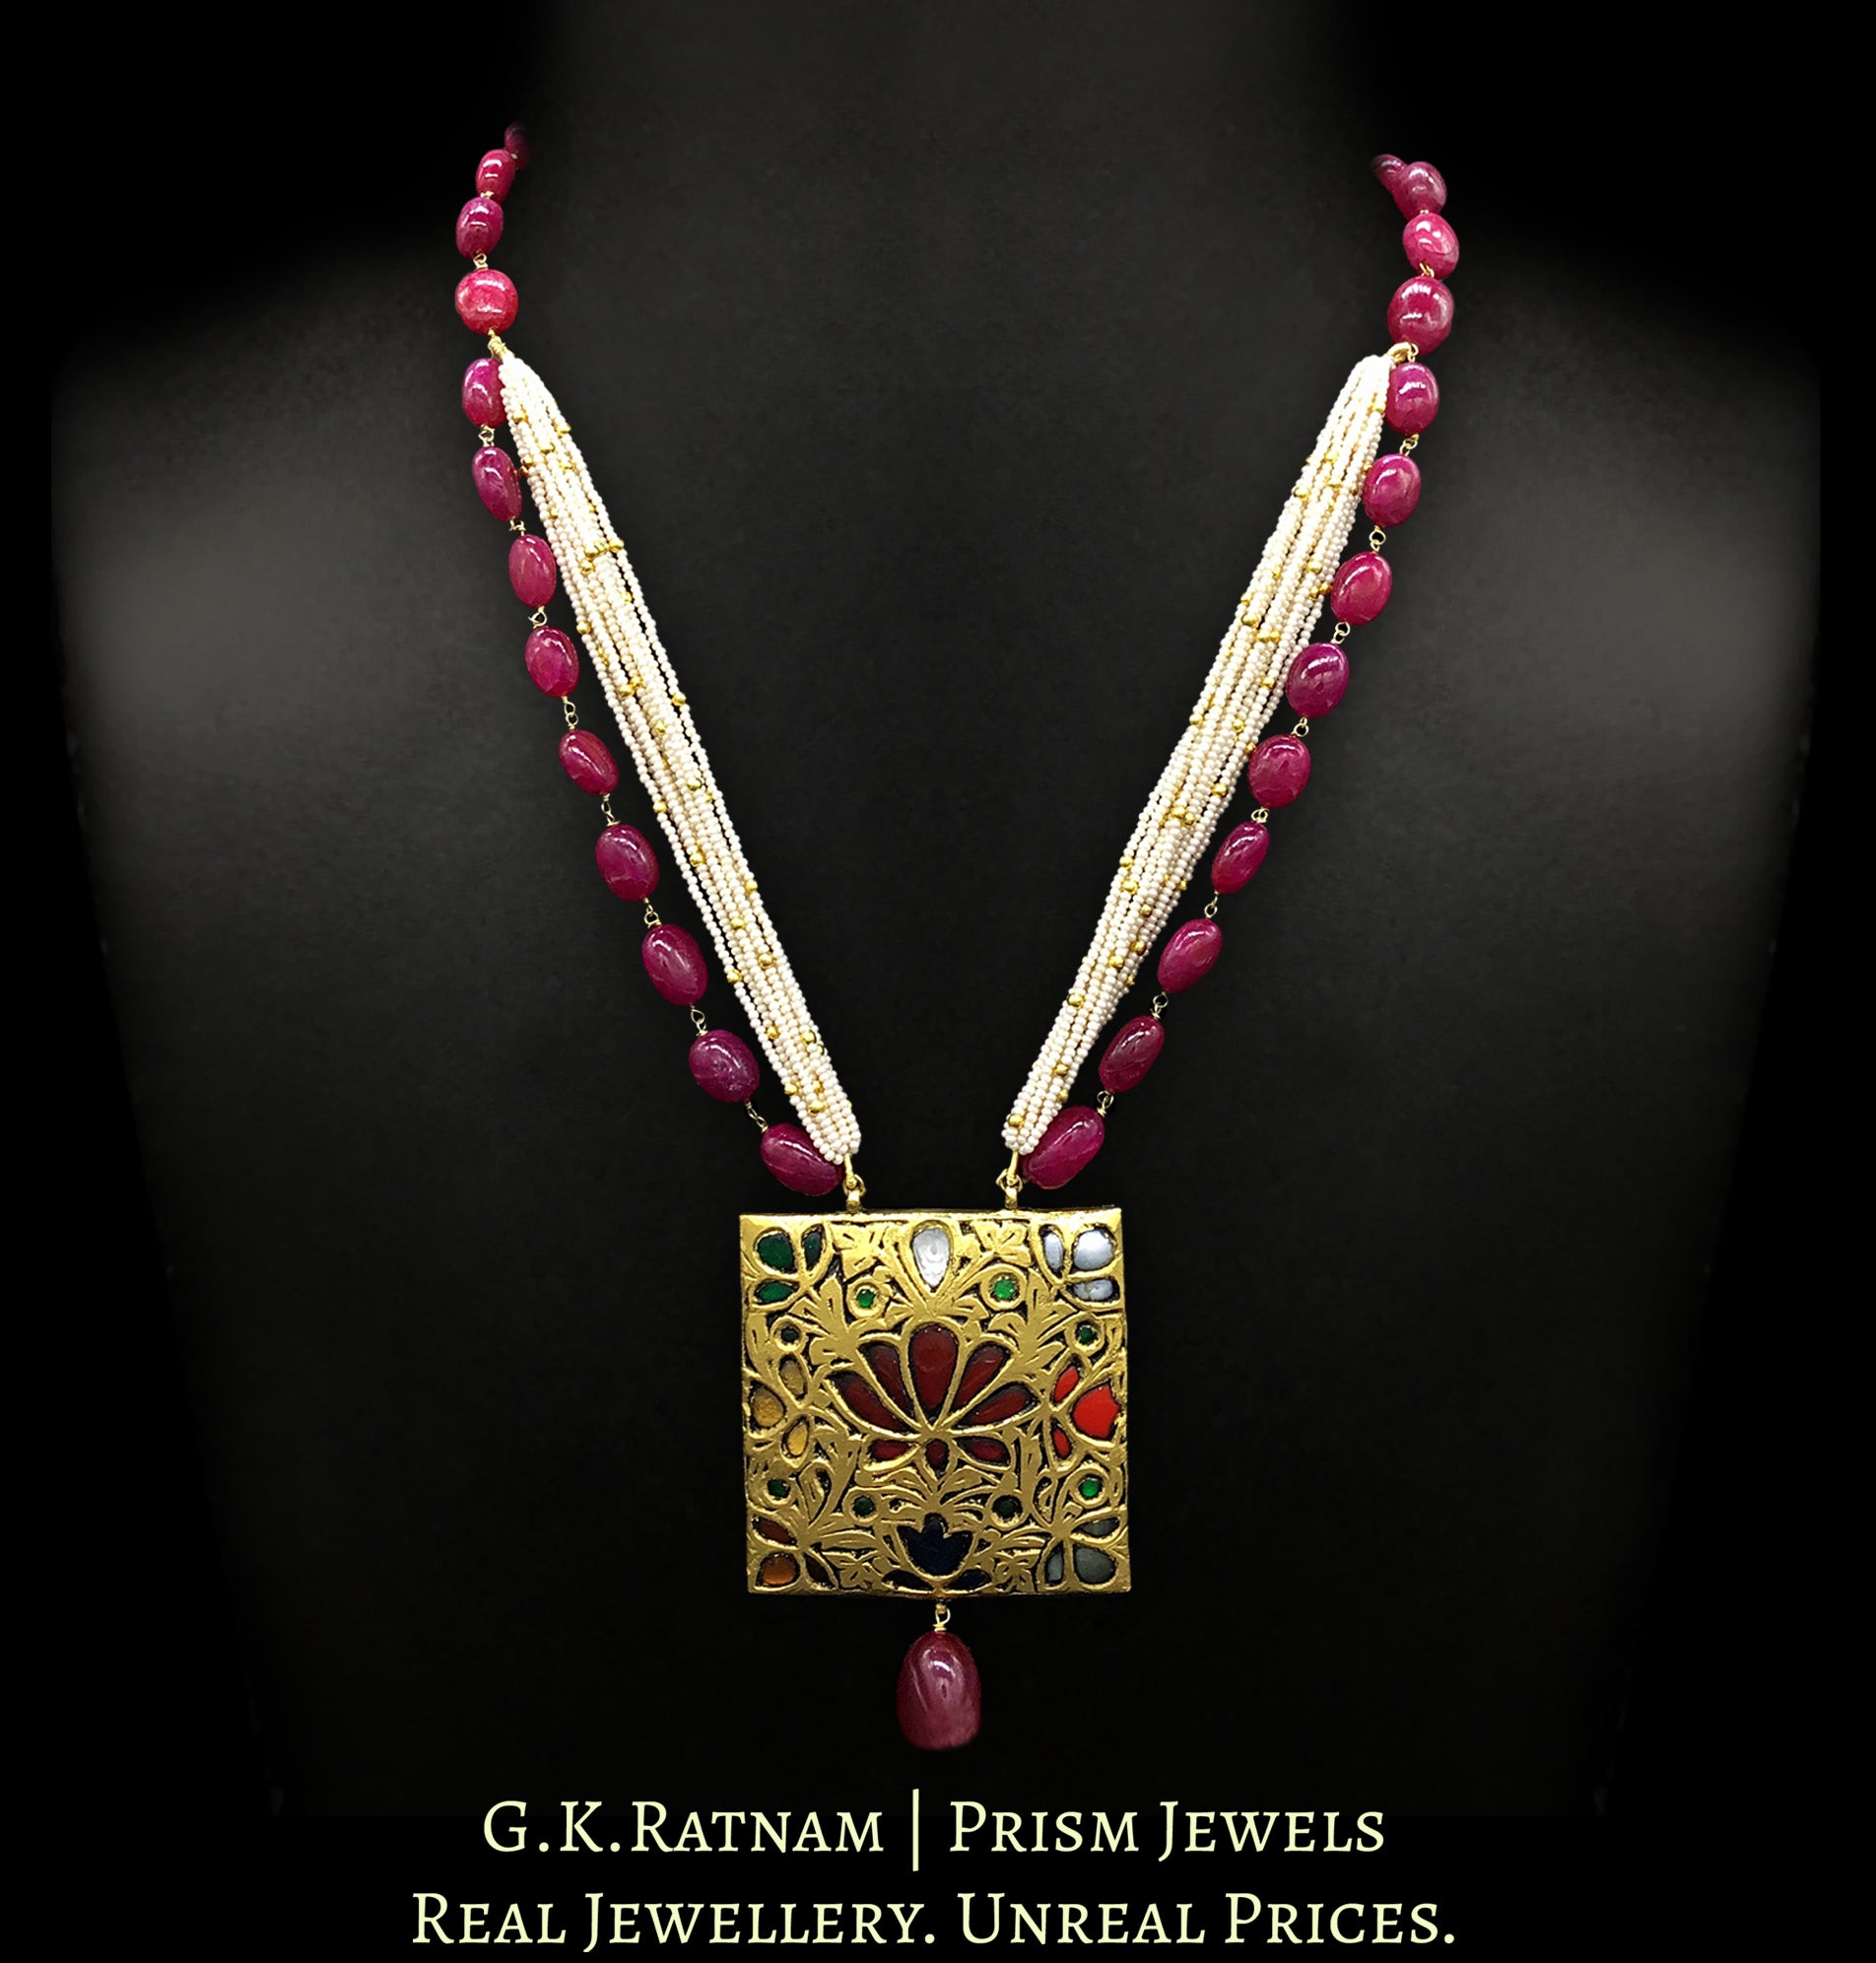 23k Gold and Diamond Polki Reversible Navratna Pendant with Natural Rubies and Chid Pearl bunches - G. K. Ratnam